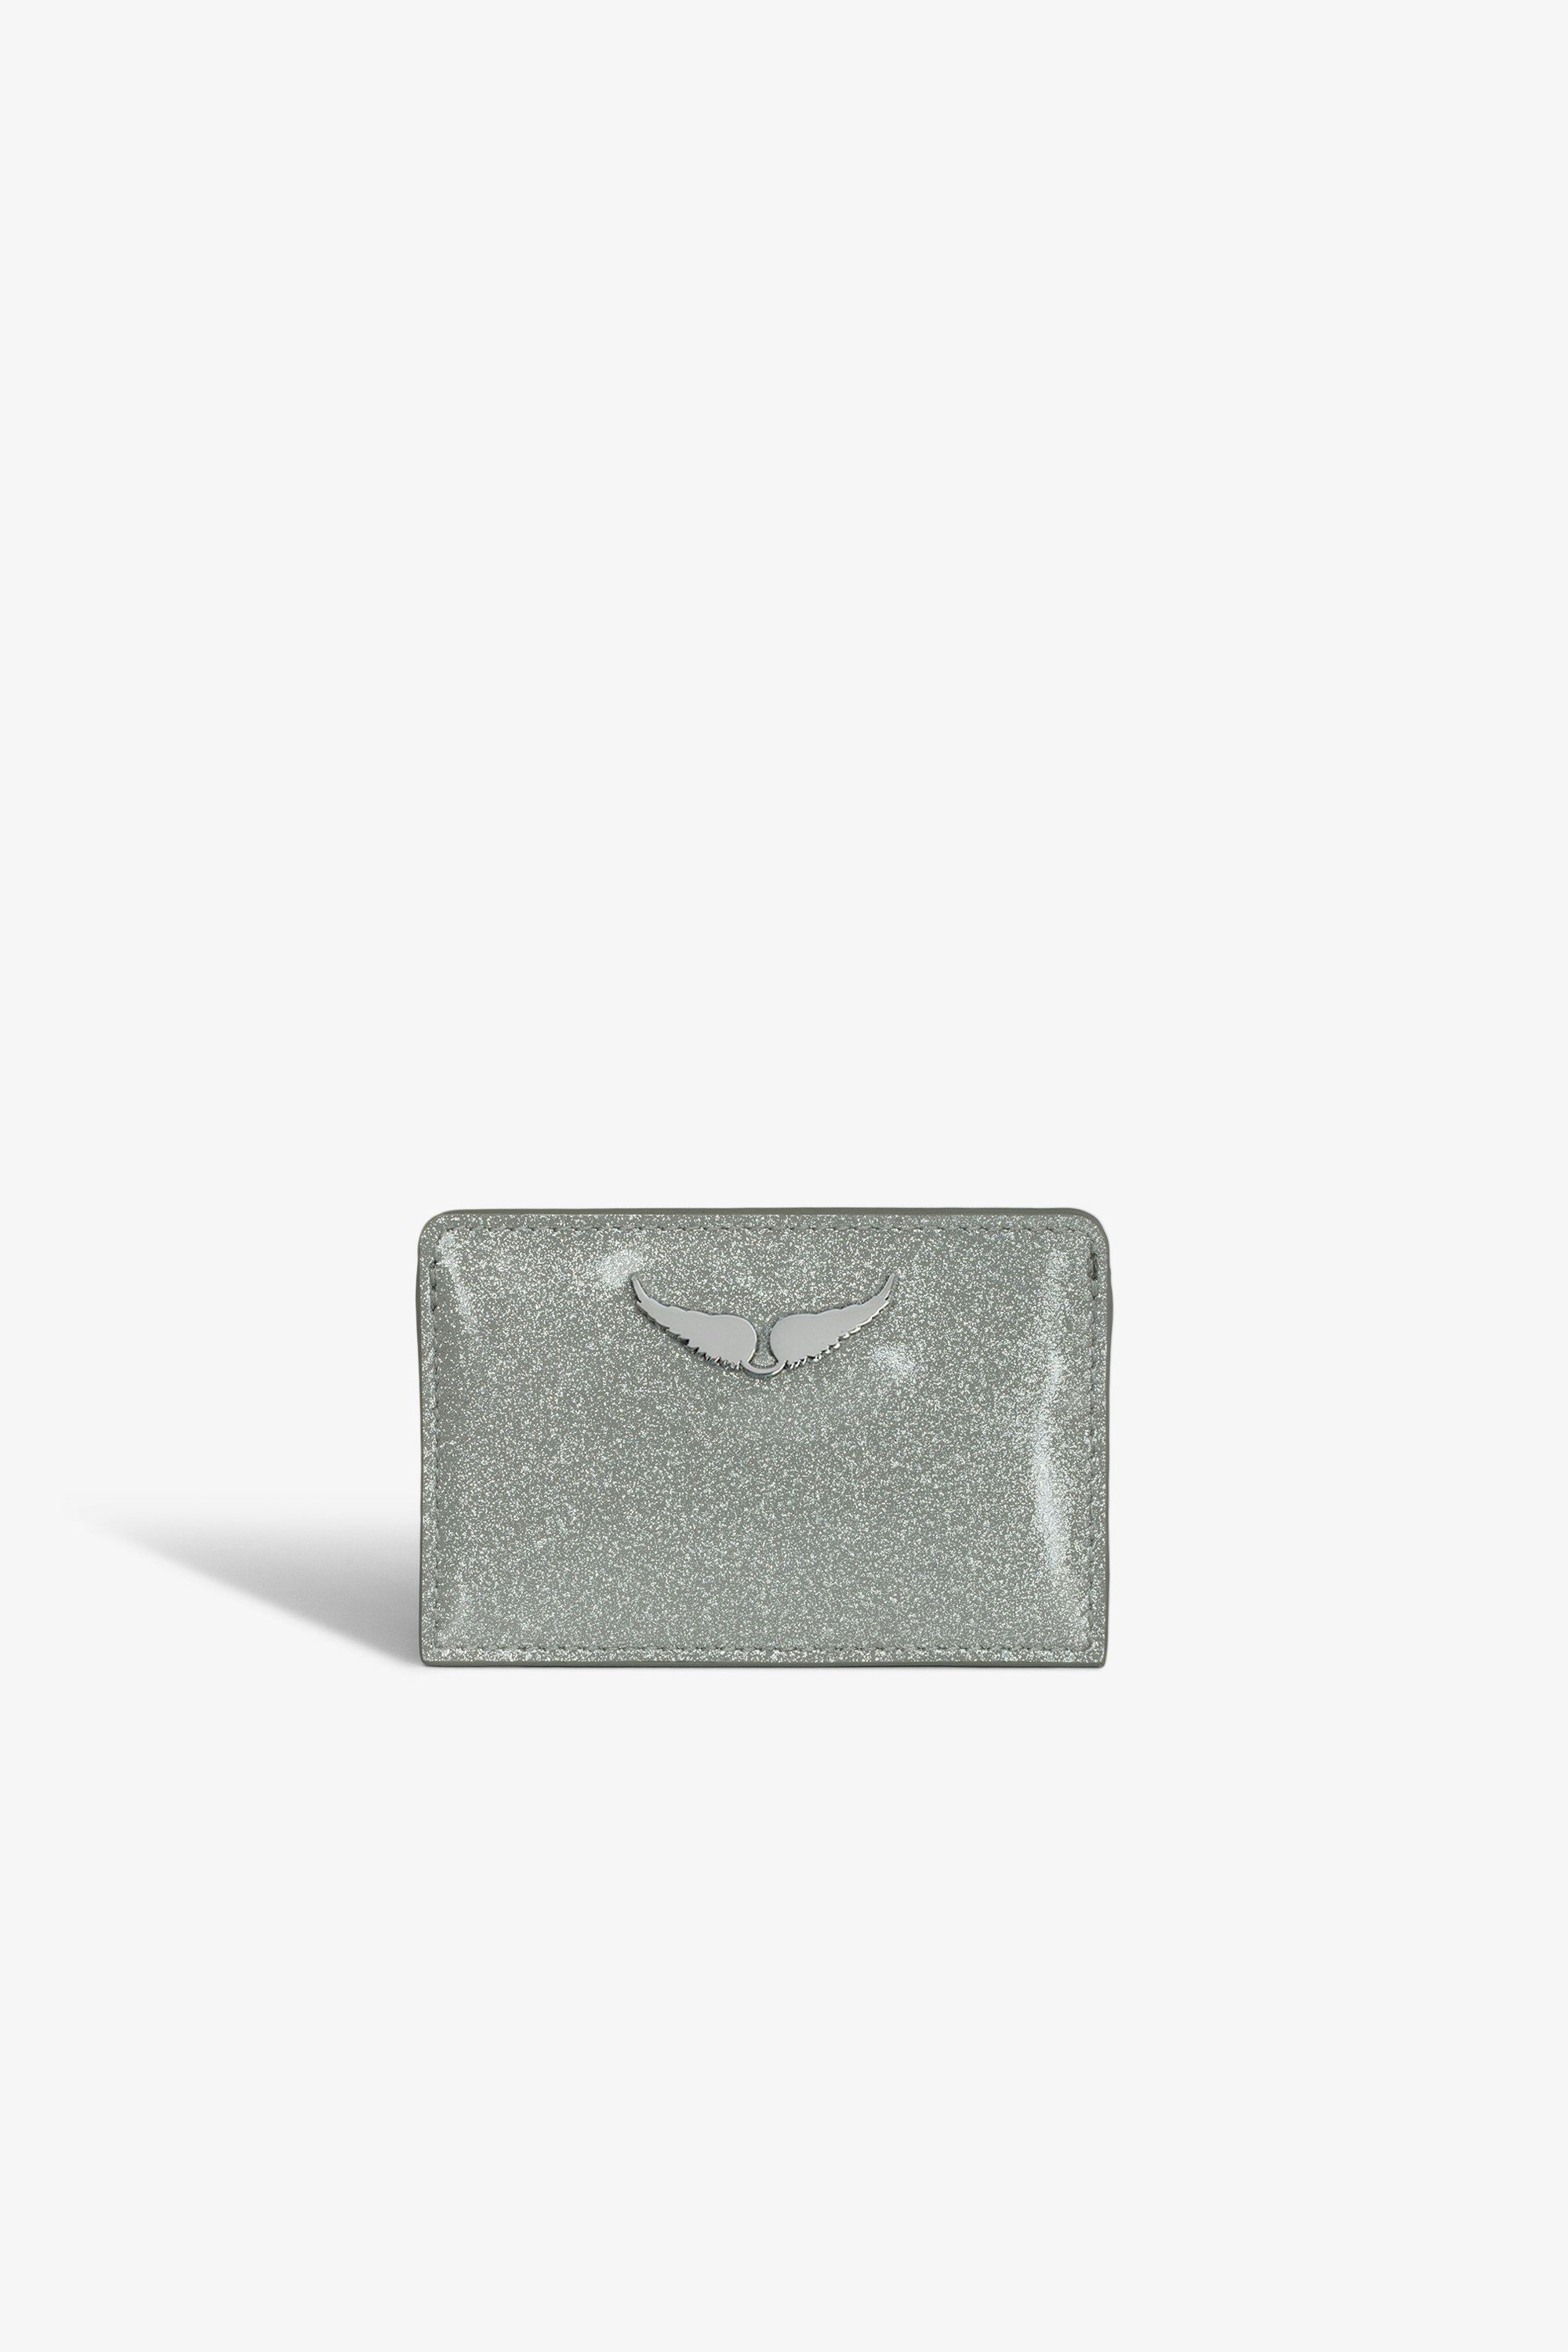 ZV Pass Infinity Patent Card Holder - Silver glitter patent leather card holder with card slots and wings charm.